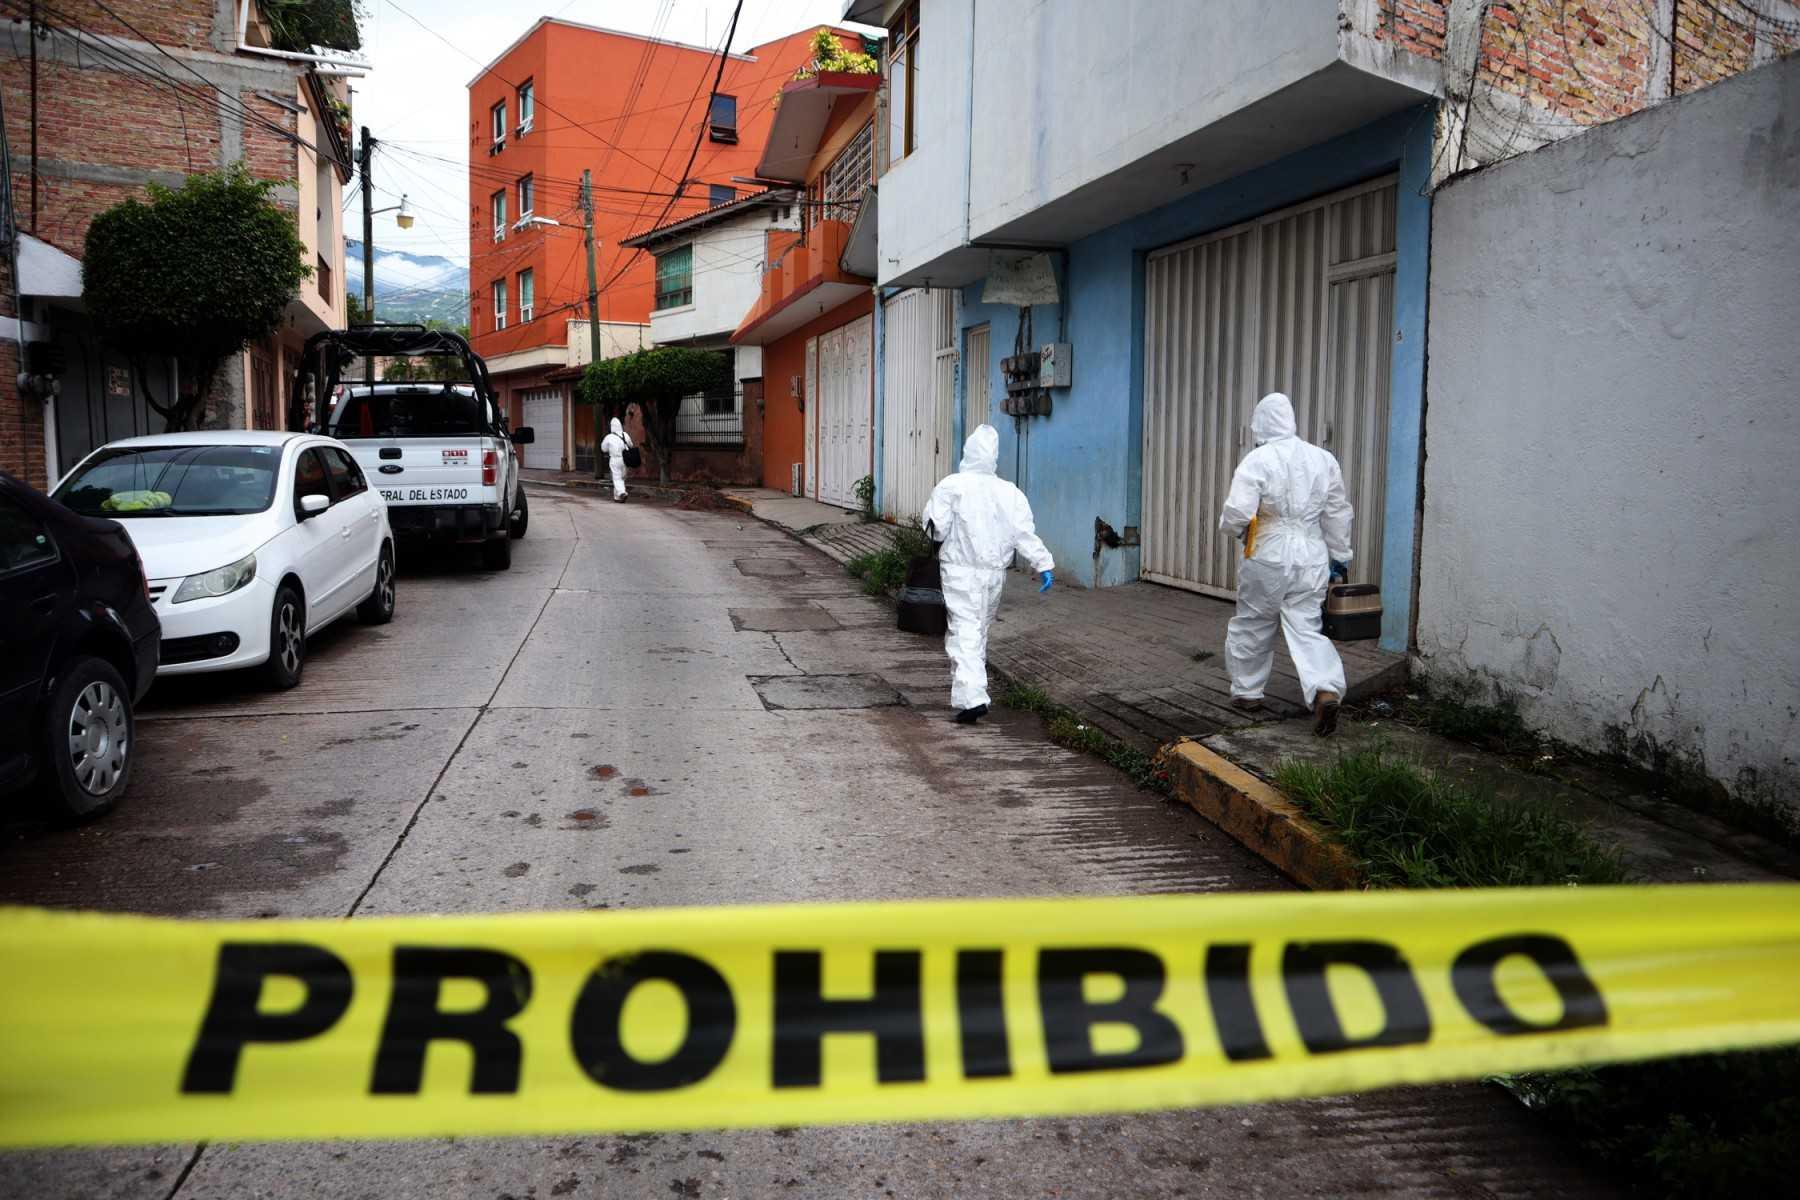 Police investigators in forensic suits inspect the area in Chilpancingo, state of Guerrero, Mexico, on Aug 22. Photo: AFP 